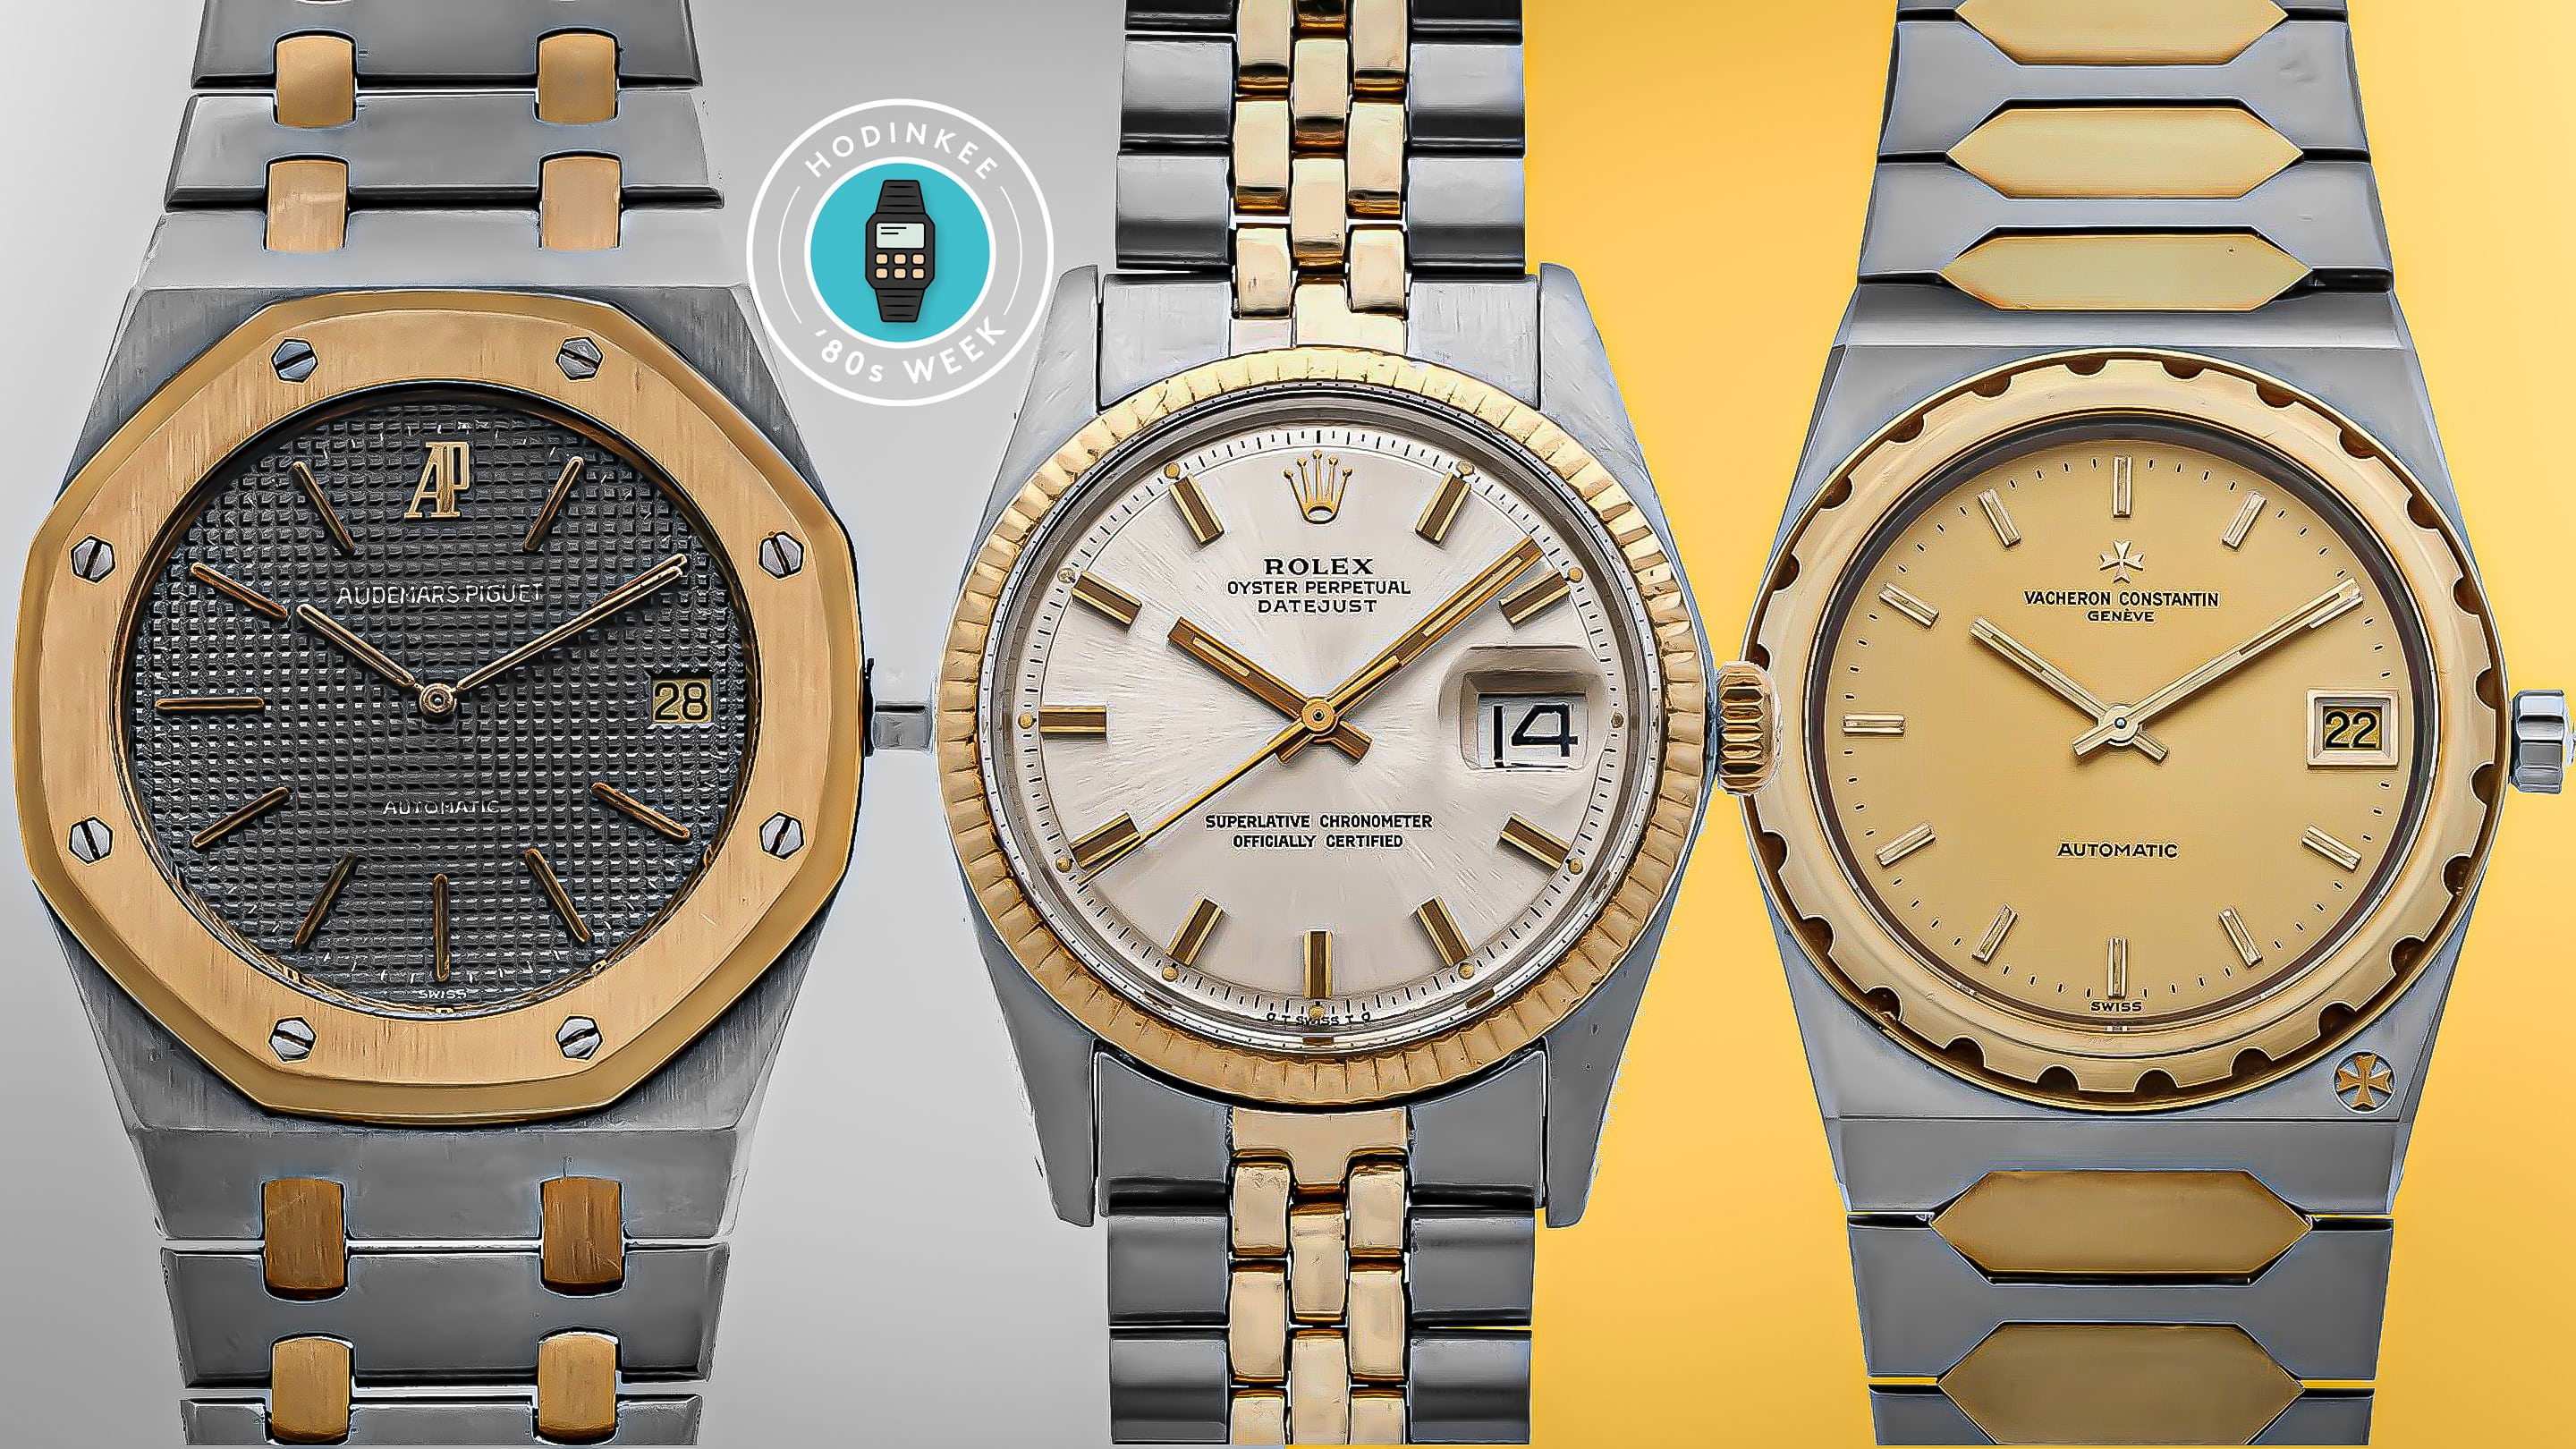 In Defense of Two-Tone Watches: Why Steel and Gold Is Due - Bloomberg